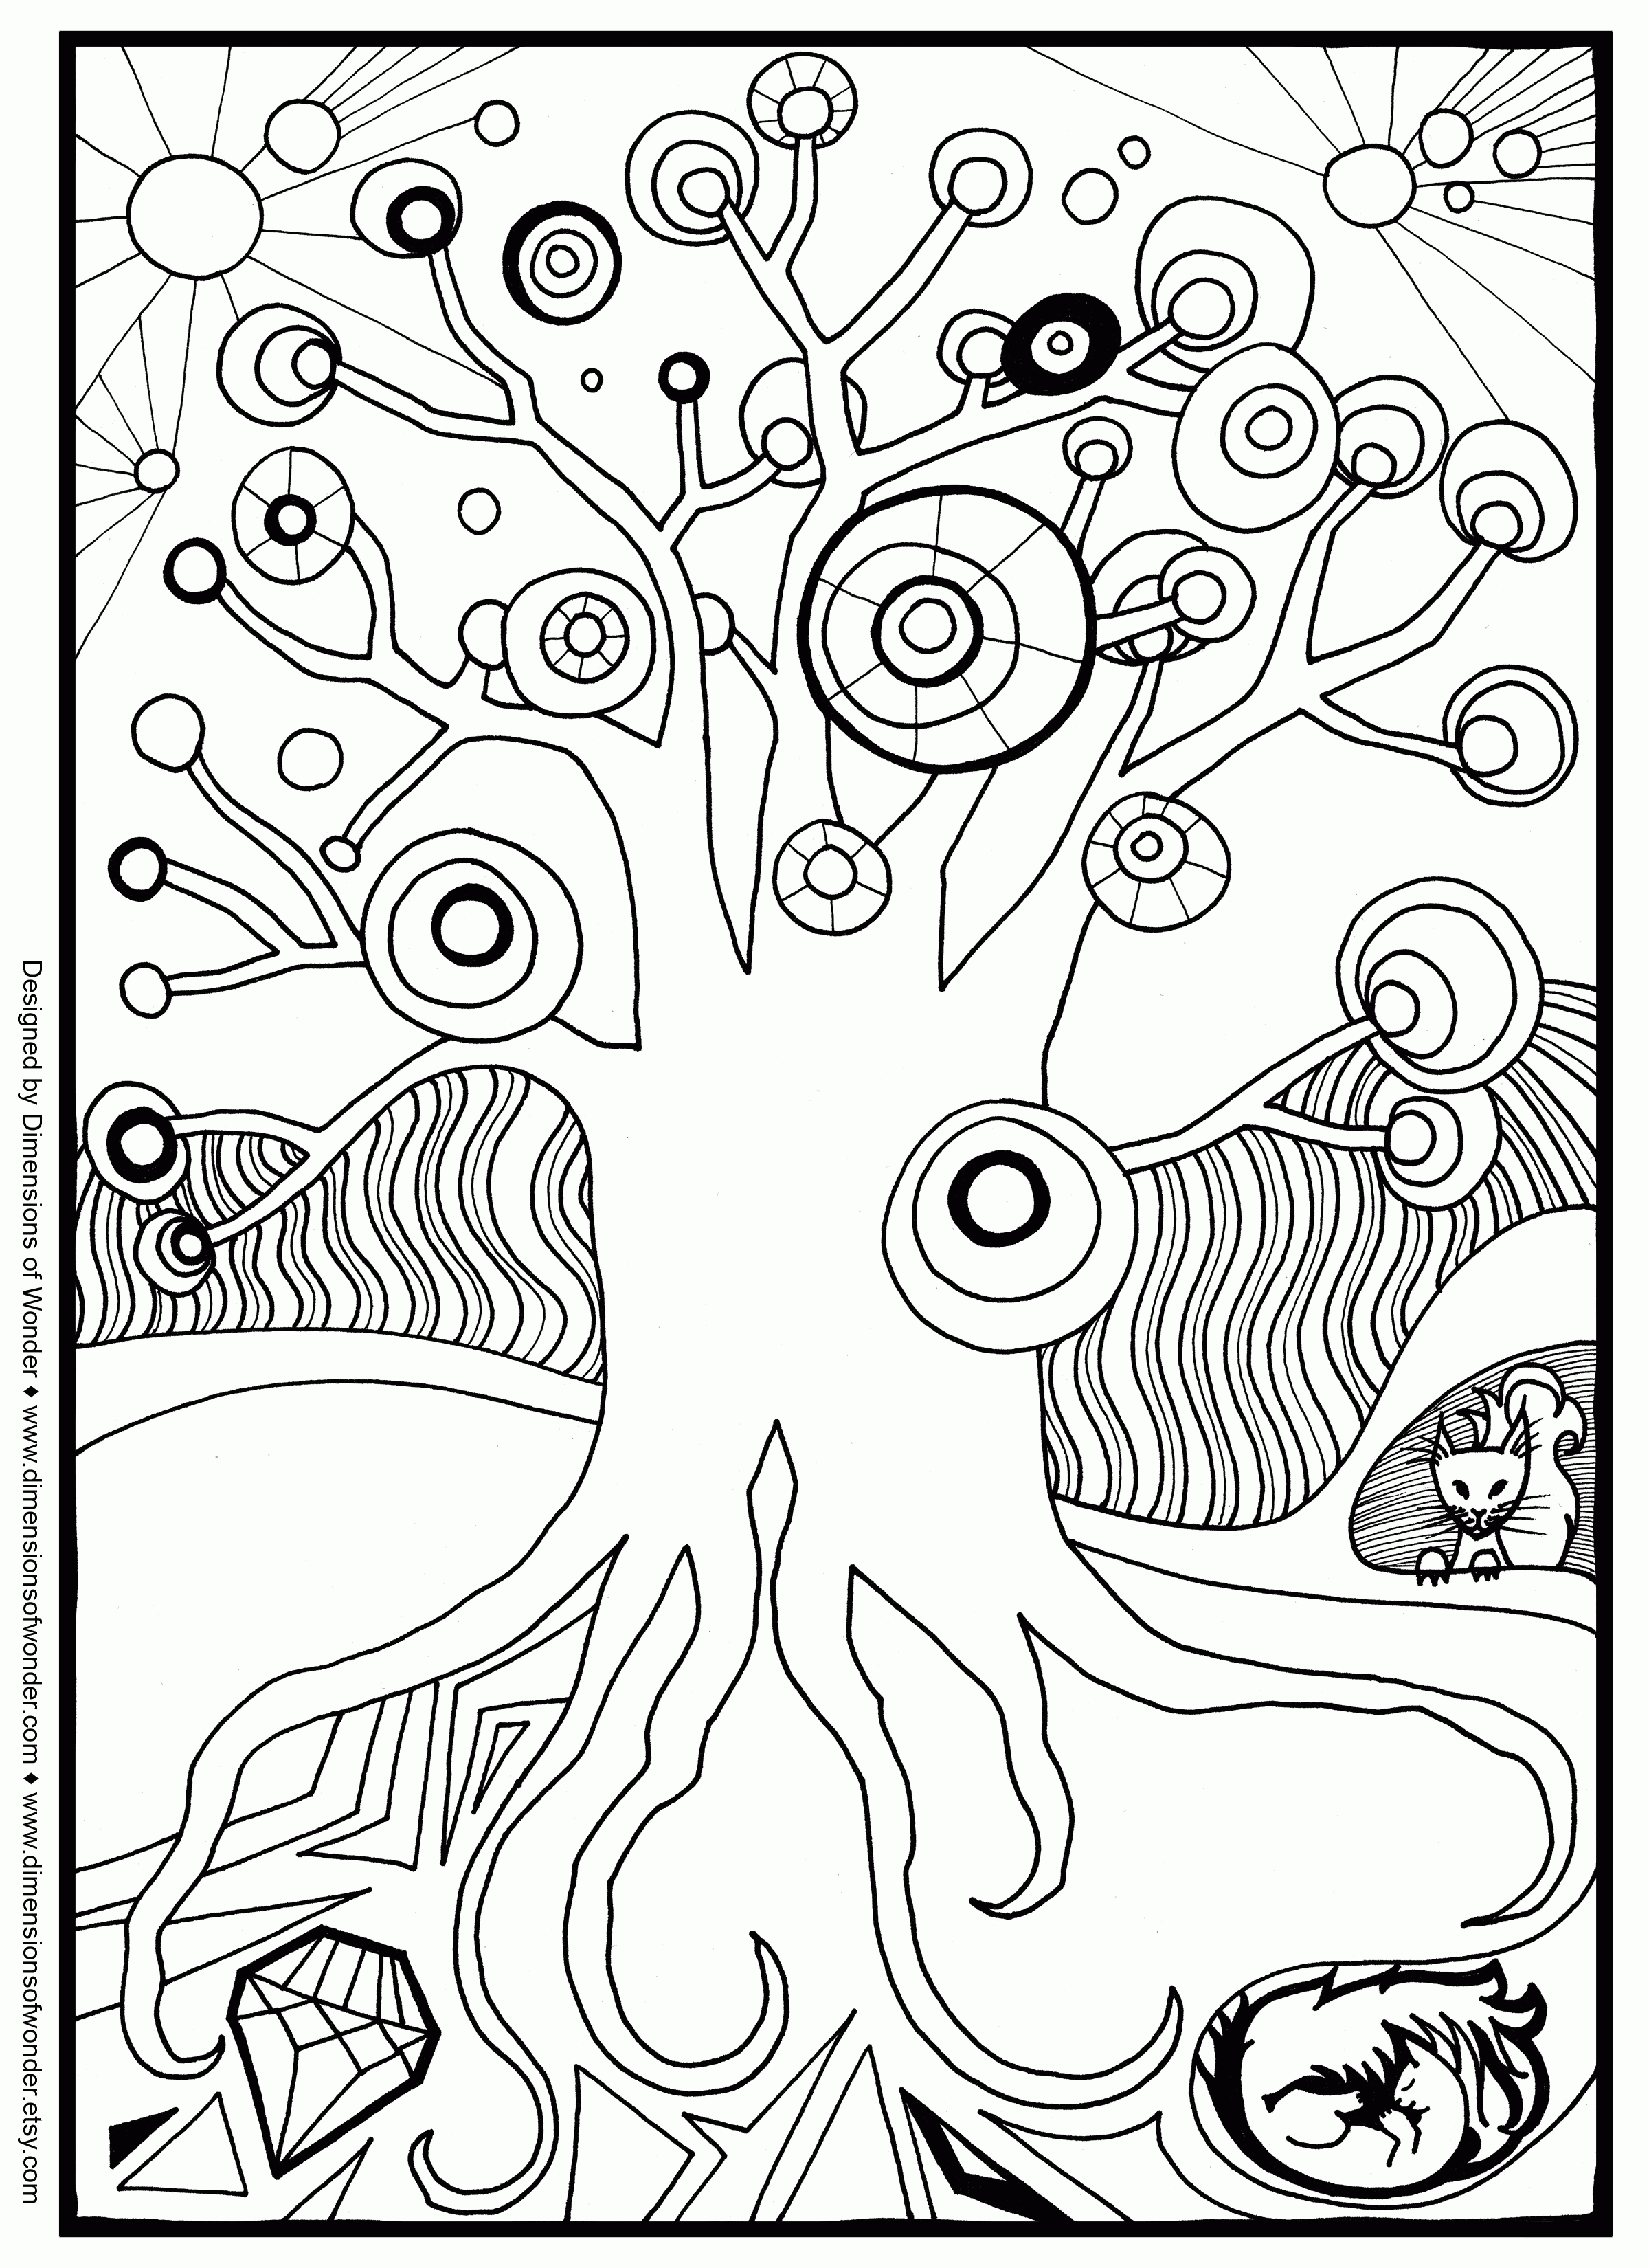 Coloring Pages: Serendipity Adult Coloring Pages Printable Winter